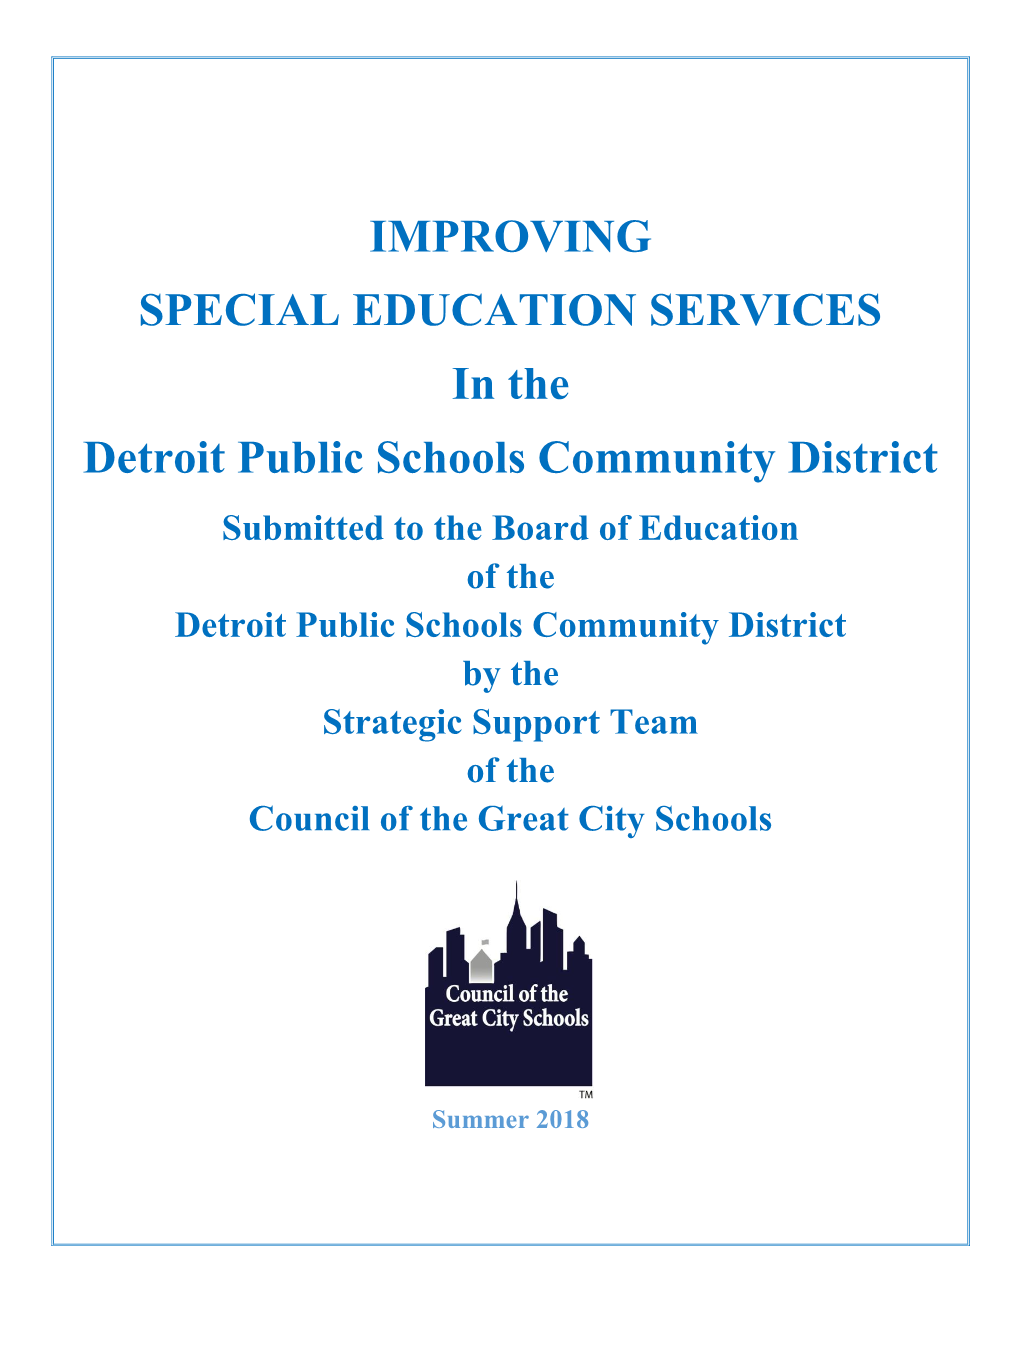 IMPROVING SPECIAL EDUCATION SERVICES in the Detroit Public Schools Community District